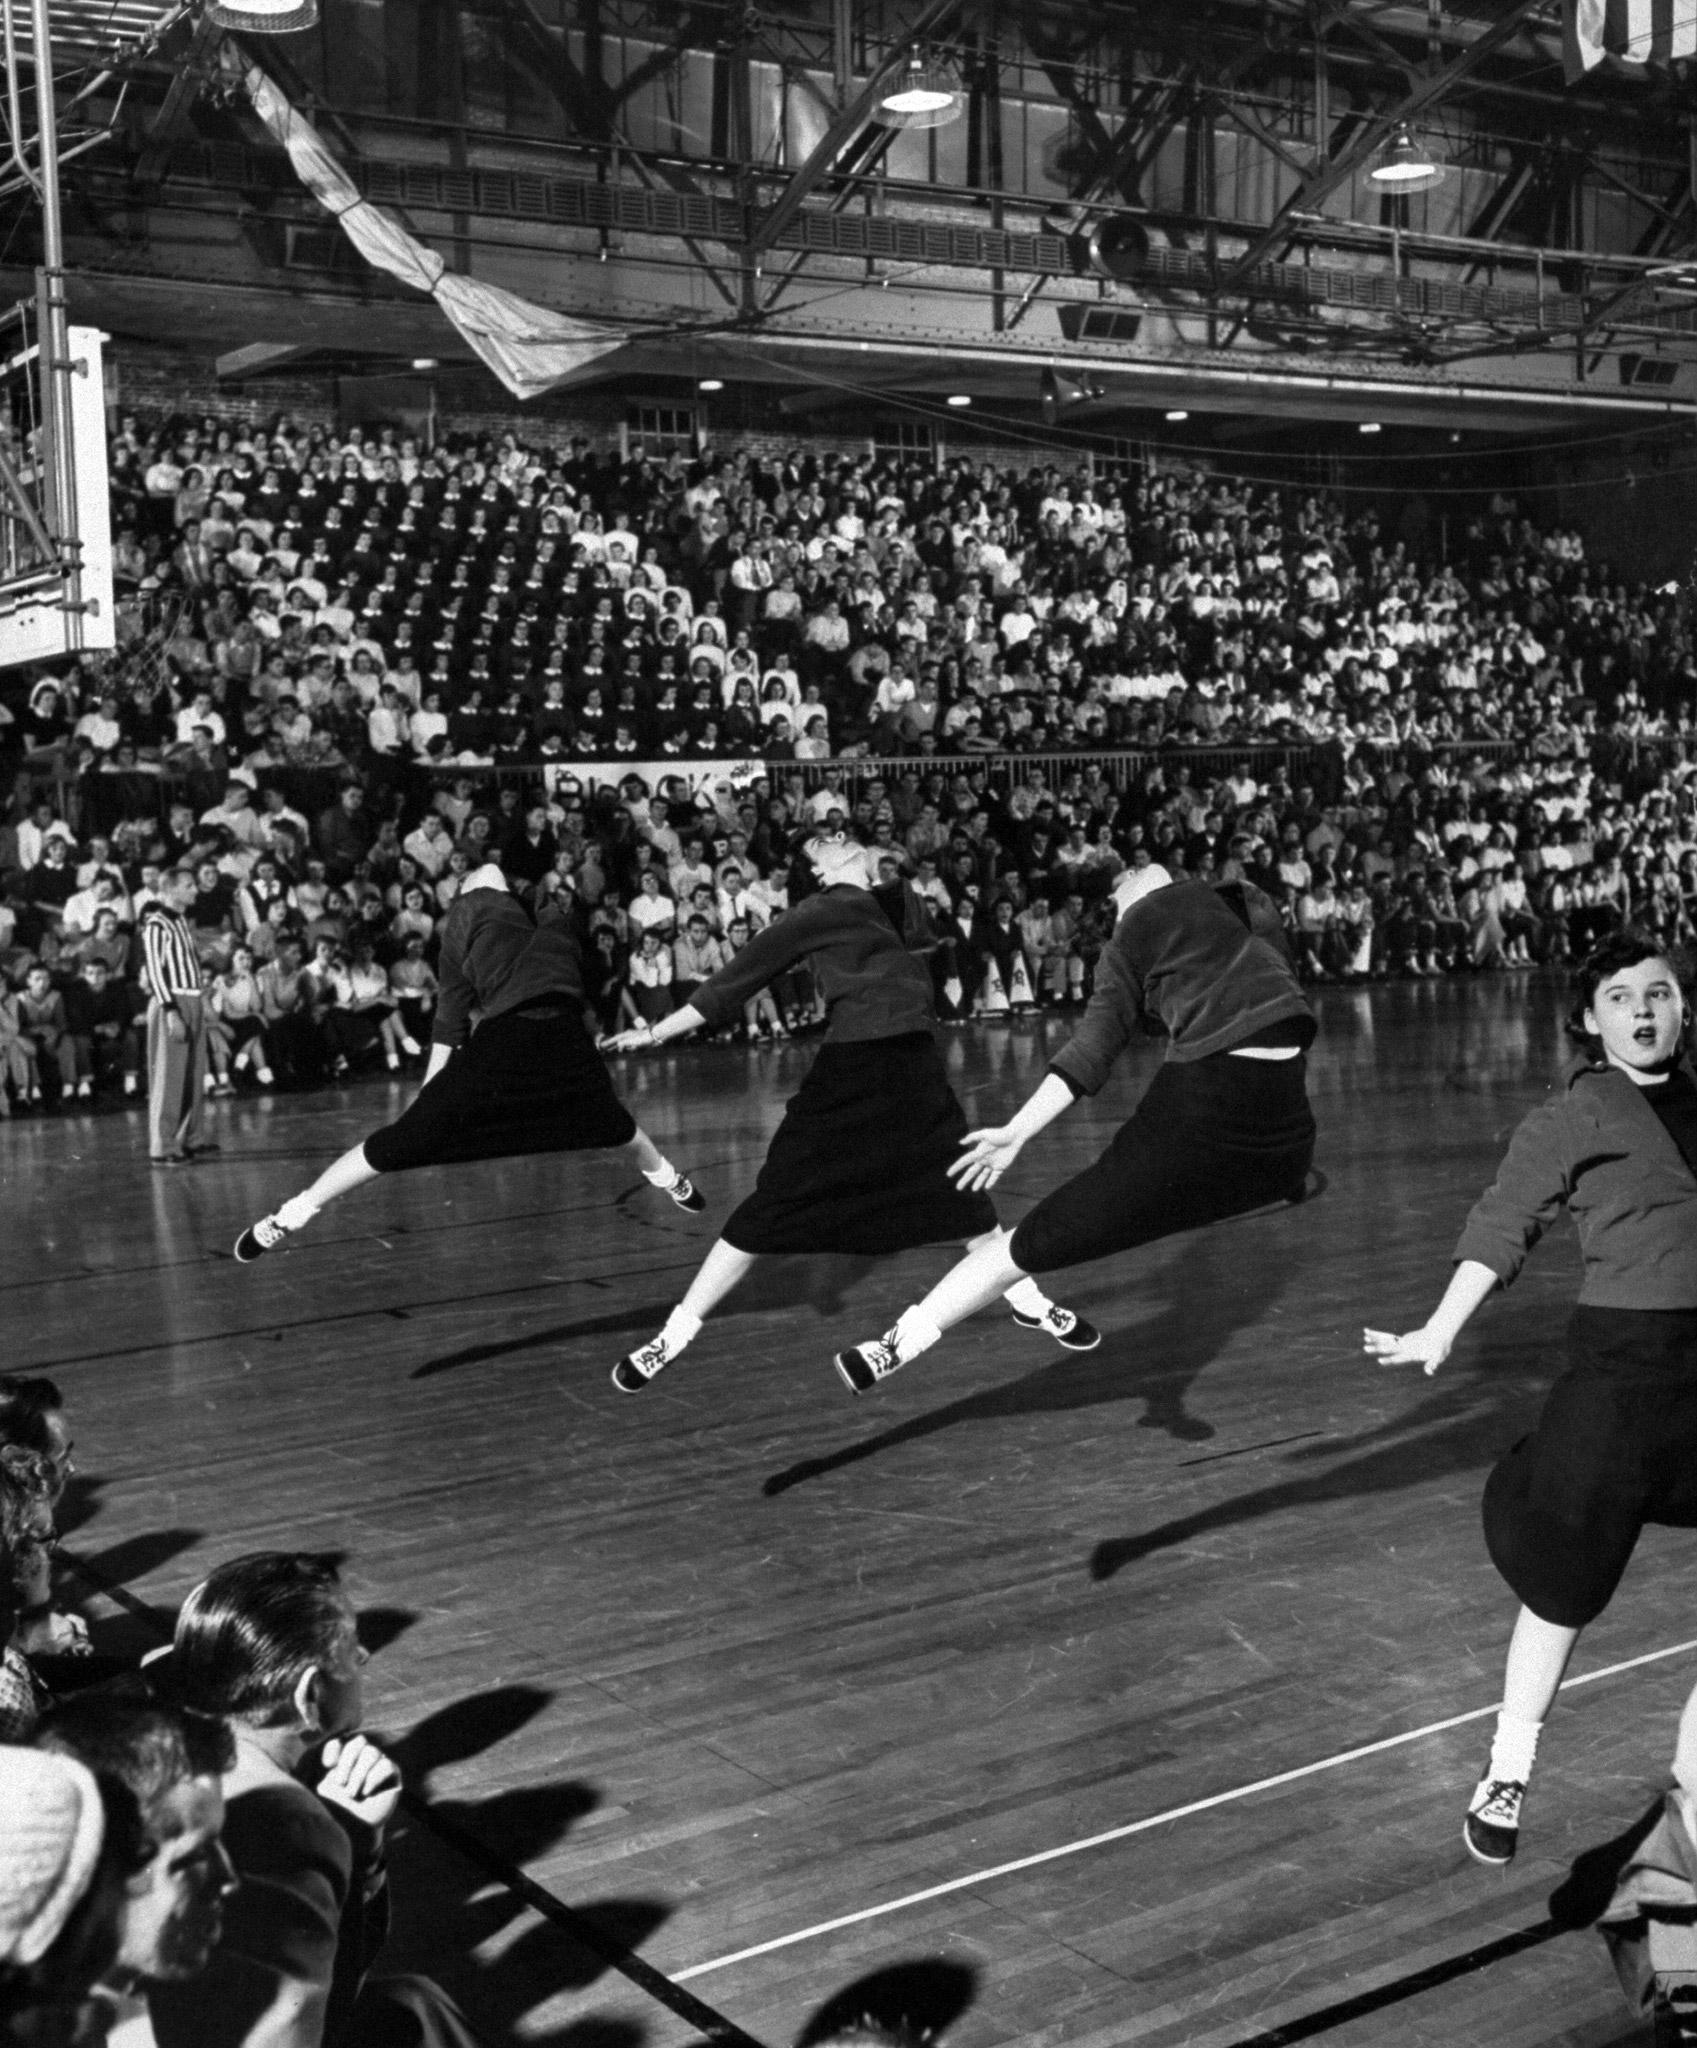 High school girl cheerleaders wearing sweaters and skirts leaping high in the air during their vigorous cheers at the basketball game, 1953.